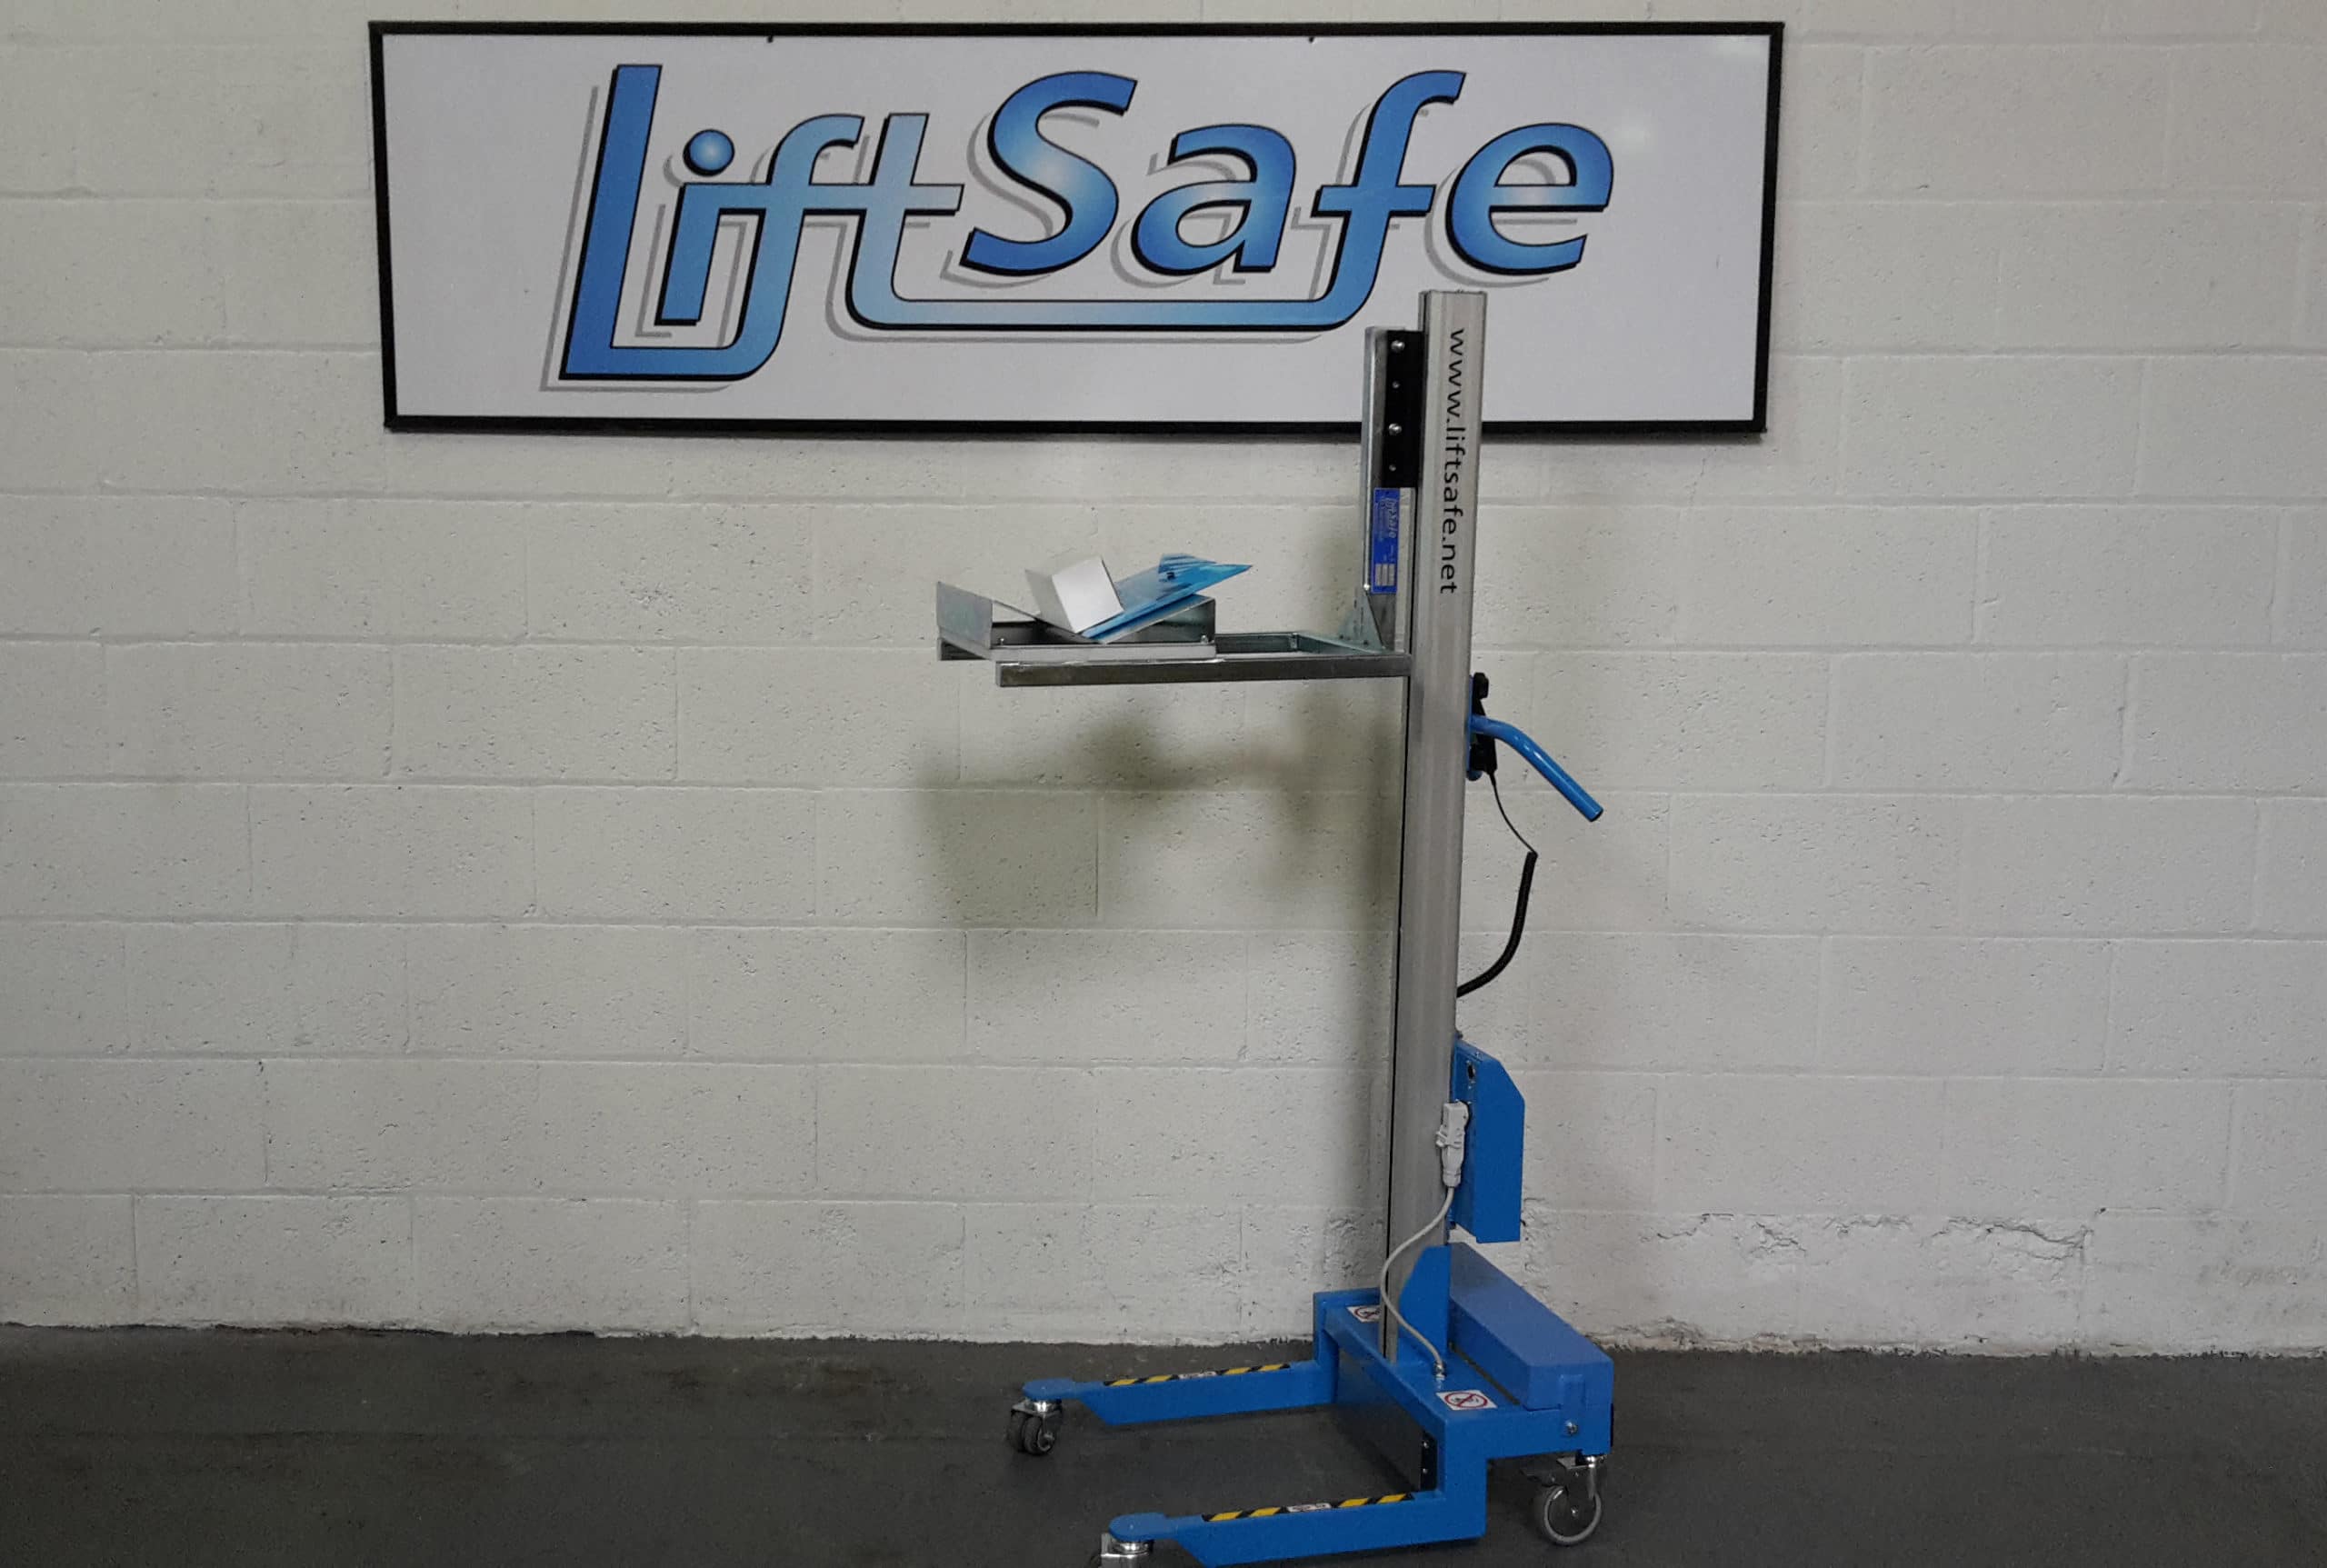 Lift Safe Supplies Large Packaging Specialist Company With Custom Built Electric Lifter